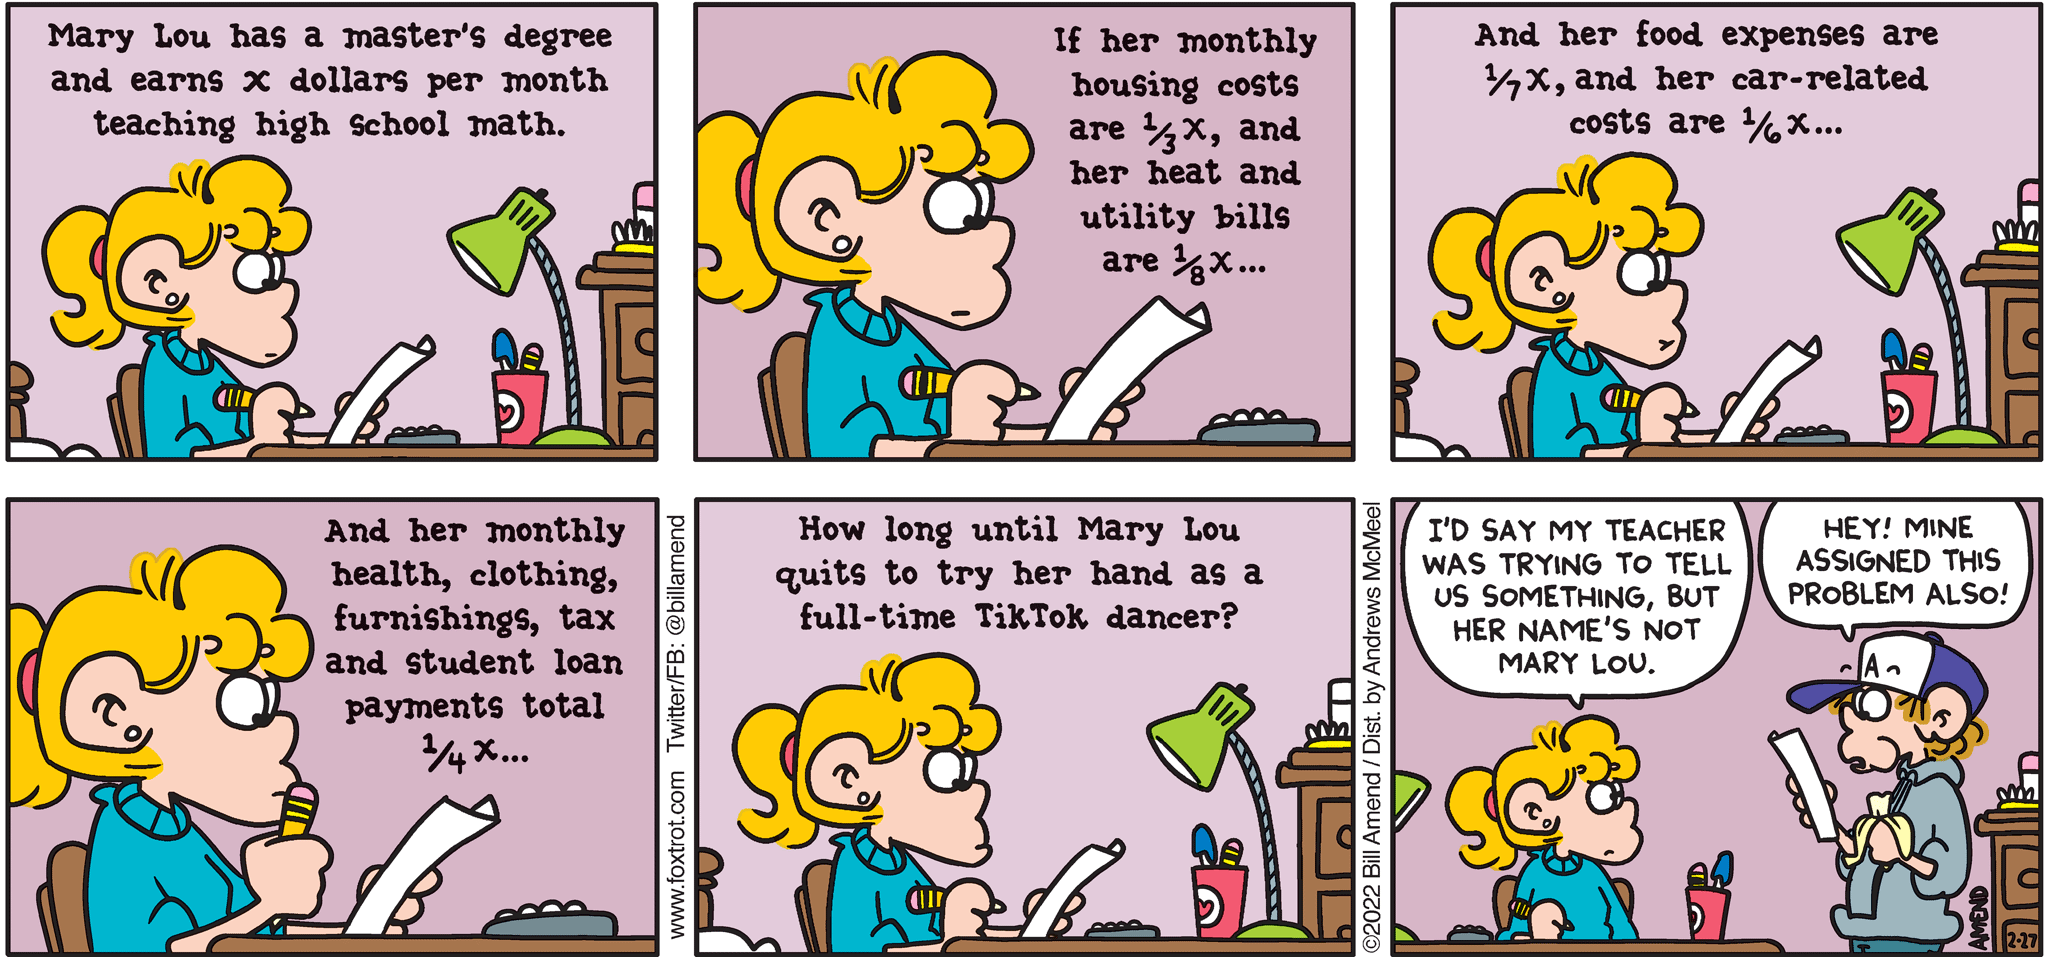 FoxTrot comic strip by Bill Amend - "Difficult Math" published February 27, 2022 - Transcript: Mary Lou has a master's degree and earrs X dollars per month teaching high school math. If her monthly housing costs are 1/3 X, and her heat and utility bills are 1/8 X, and her food expenses are 1/7 X, and her car-related costs are 1/6 X... and her monthly health, clothing, furnishings, tax and student loan payments total 1/4 X... How long until Mary Lou quits to try her hand as a full-time TikTok dancer? Paige Fox: I'd say my teacher was trying to tell us something, but her name's not Mary Lou. Peter Fox: Hey! Mine assigned this problem also!